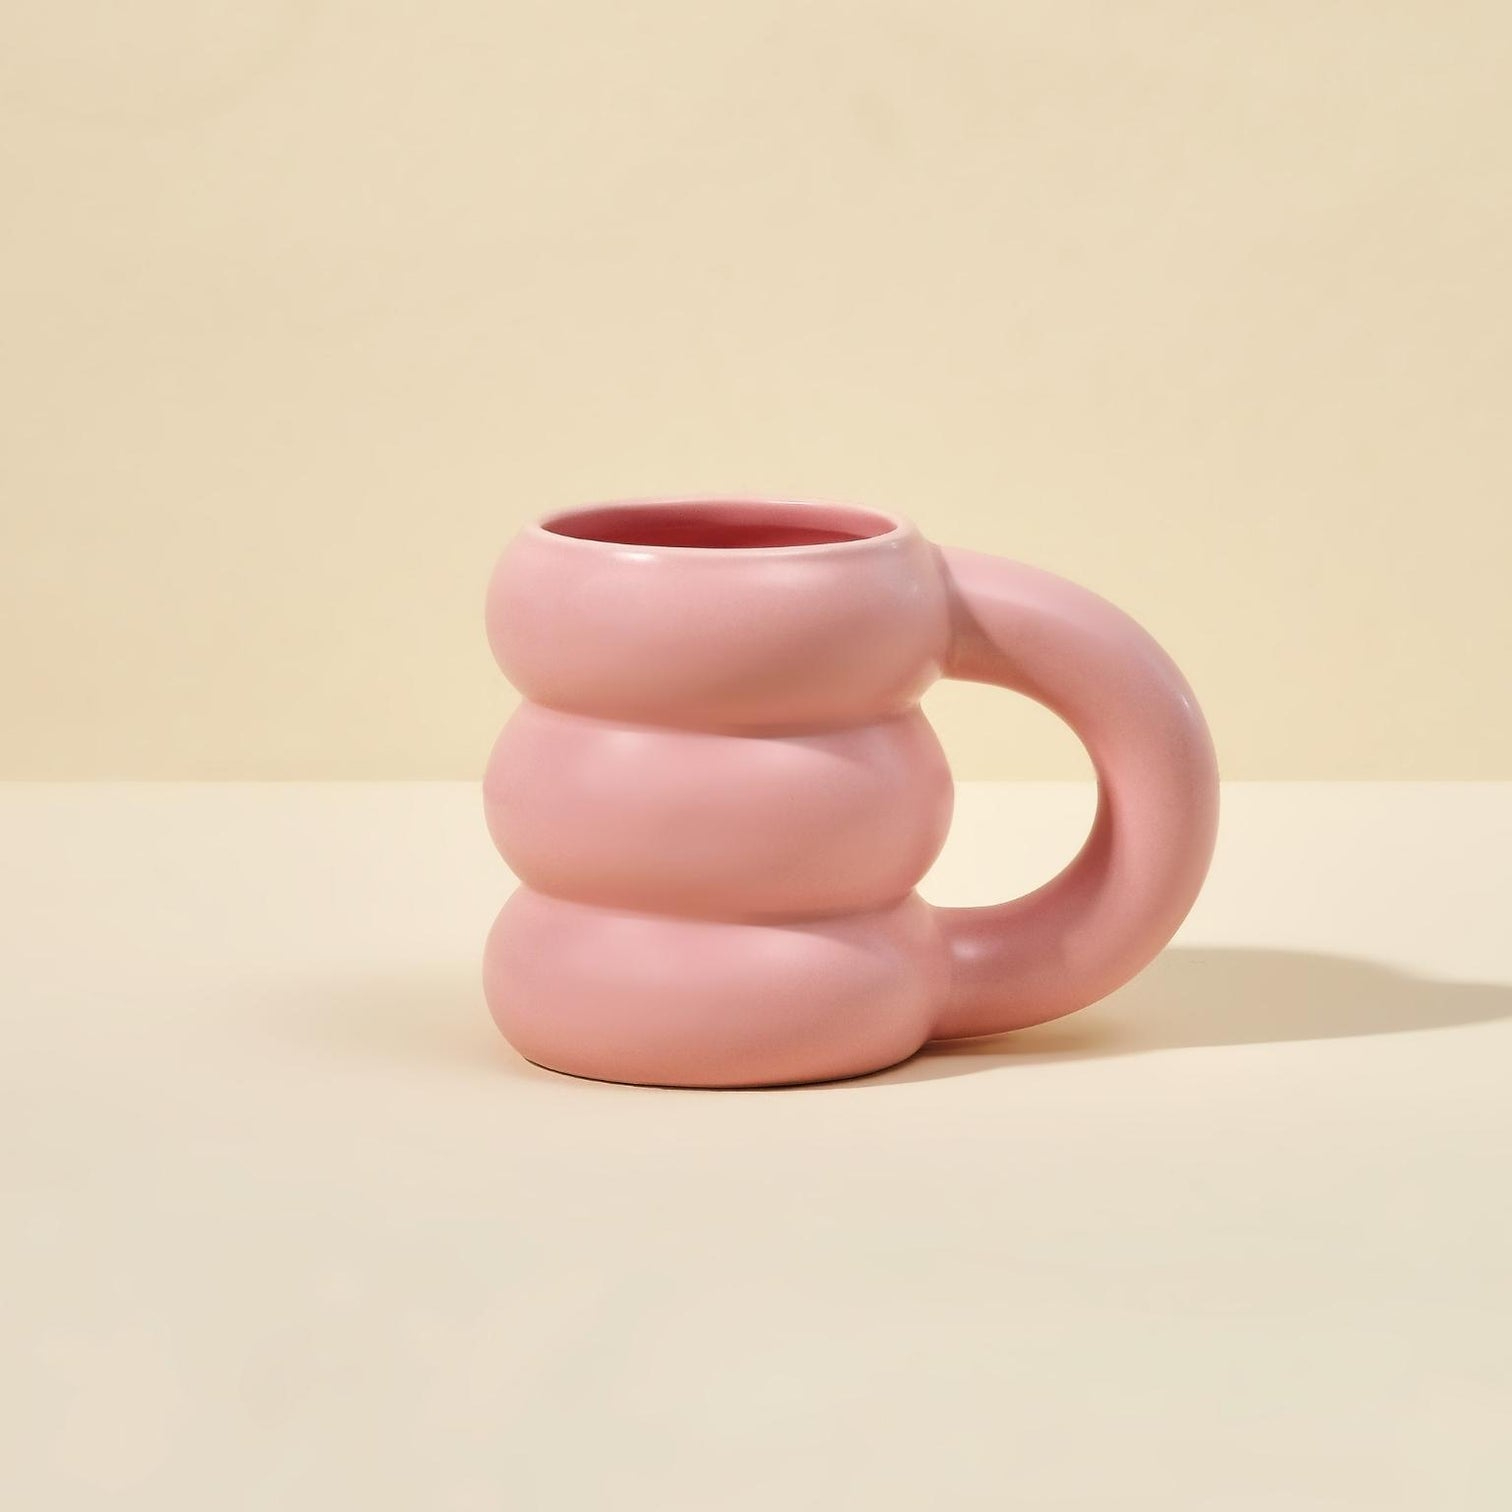 A shot of a pink cloud mug on light yellow background - graduation gifts for friends